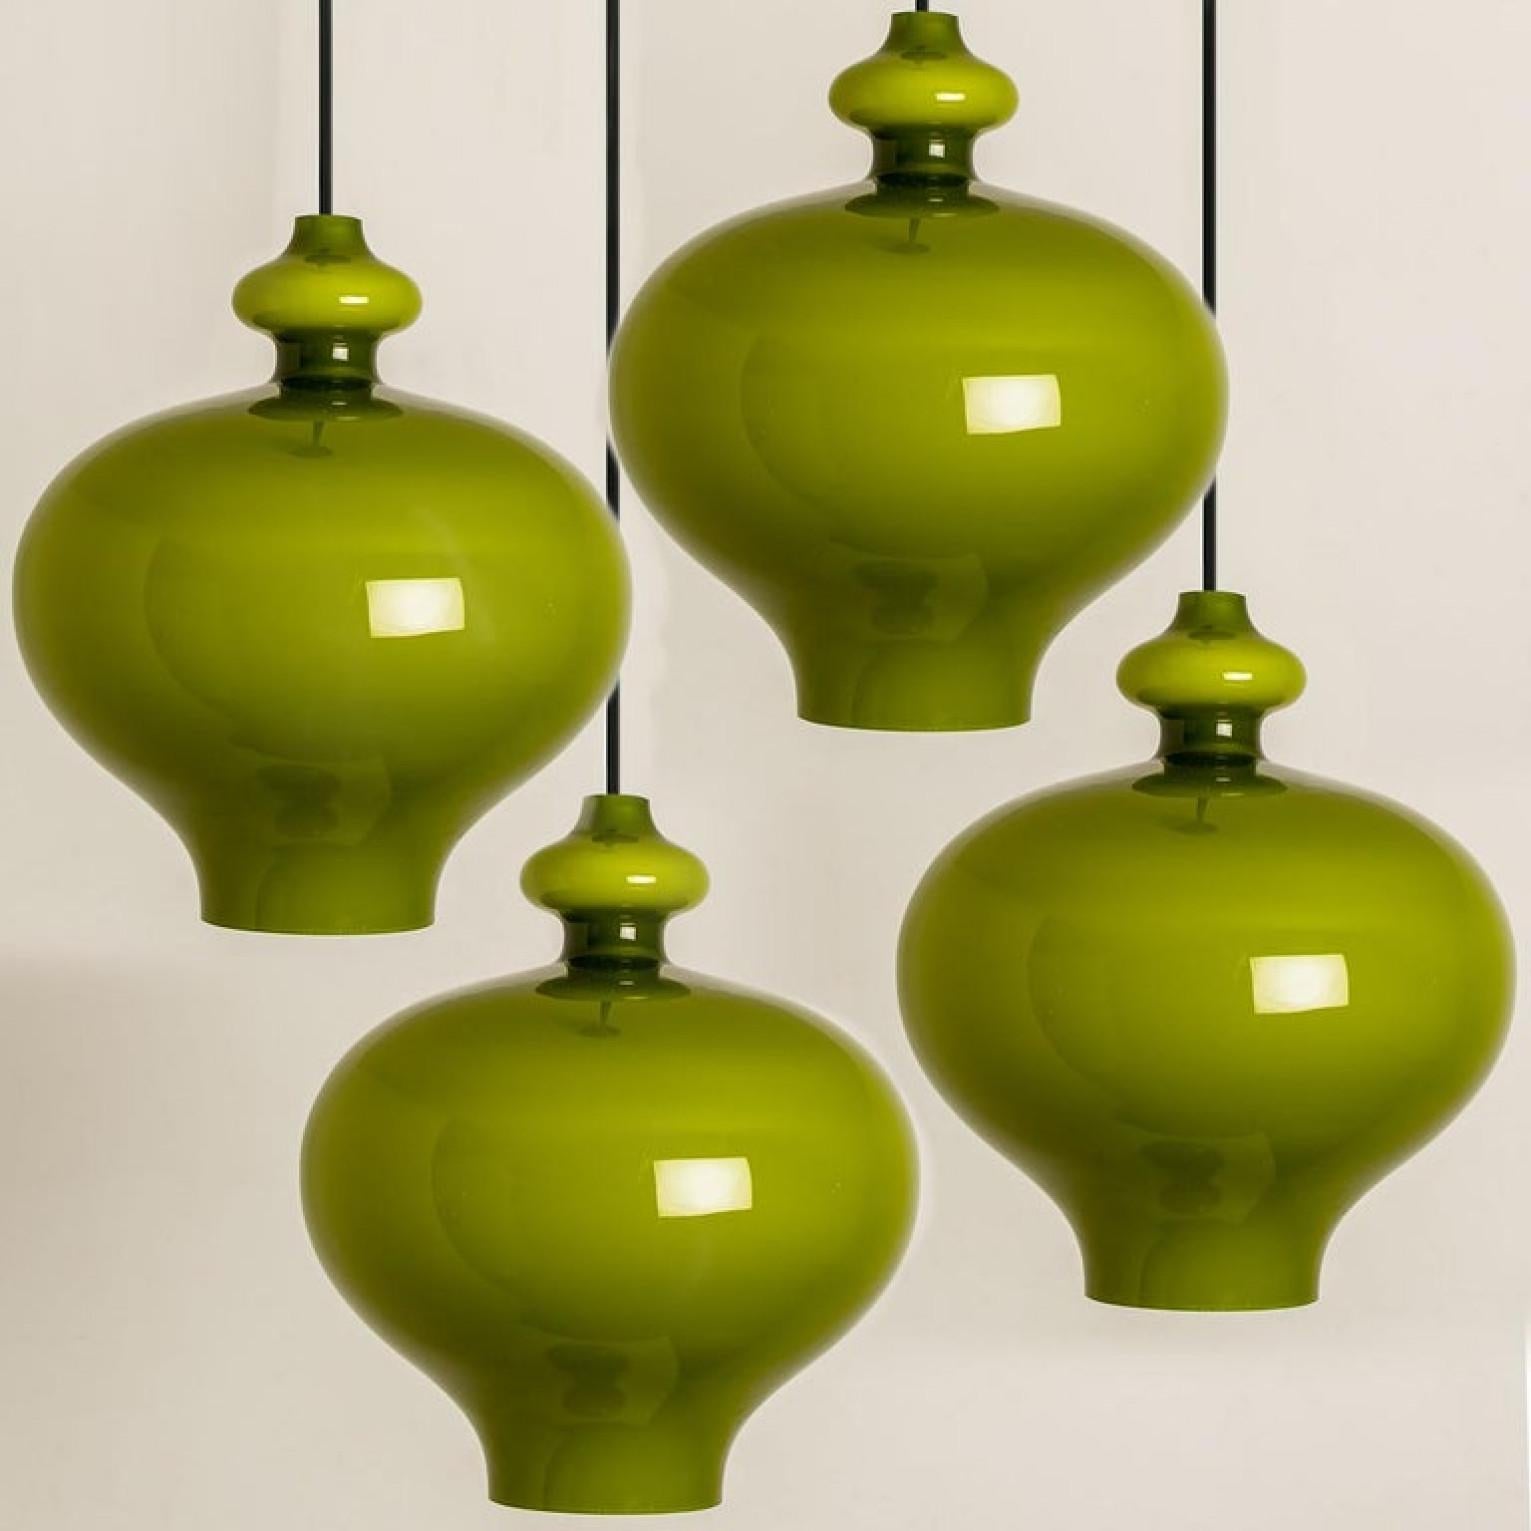 Pair of Hans-Agne Jakobsson for Staff Green Glass Pendant Lights, 1960 For Sale 1